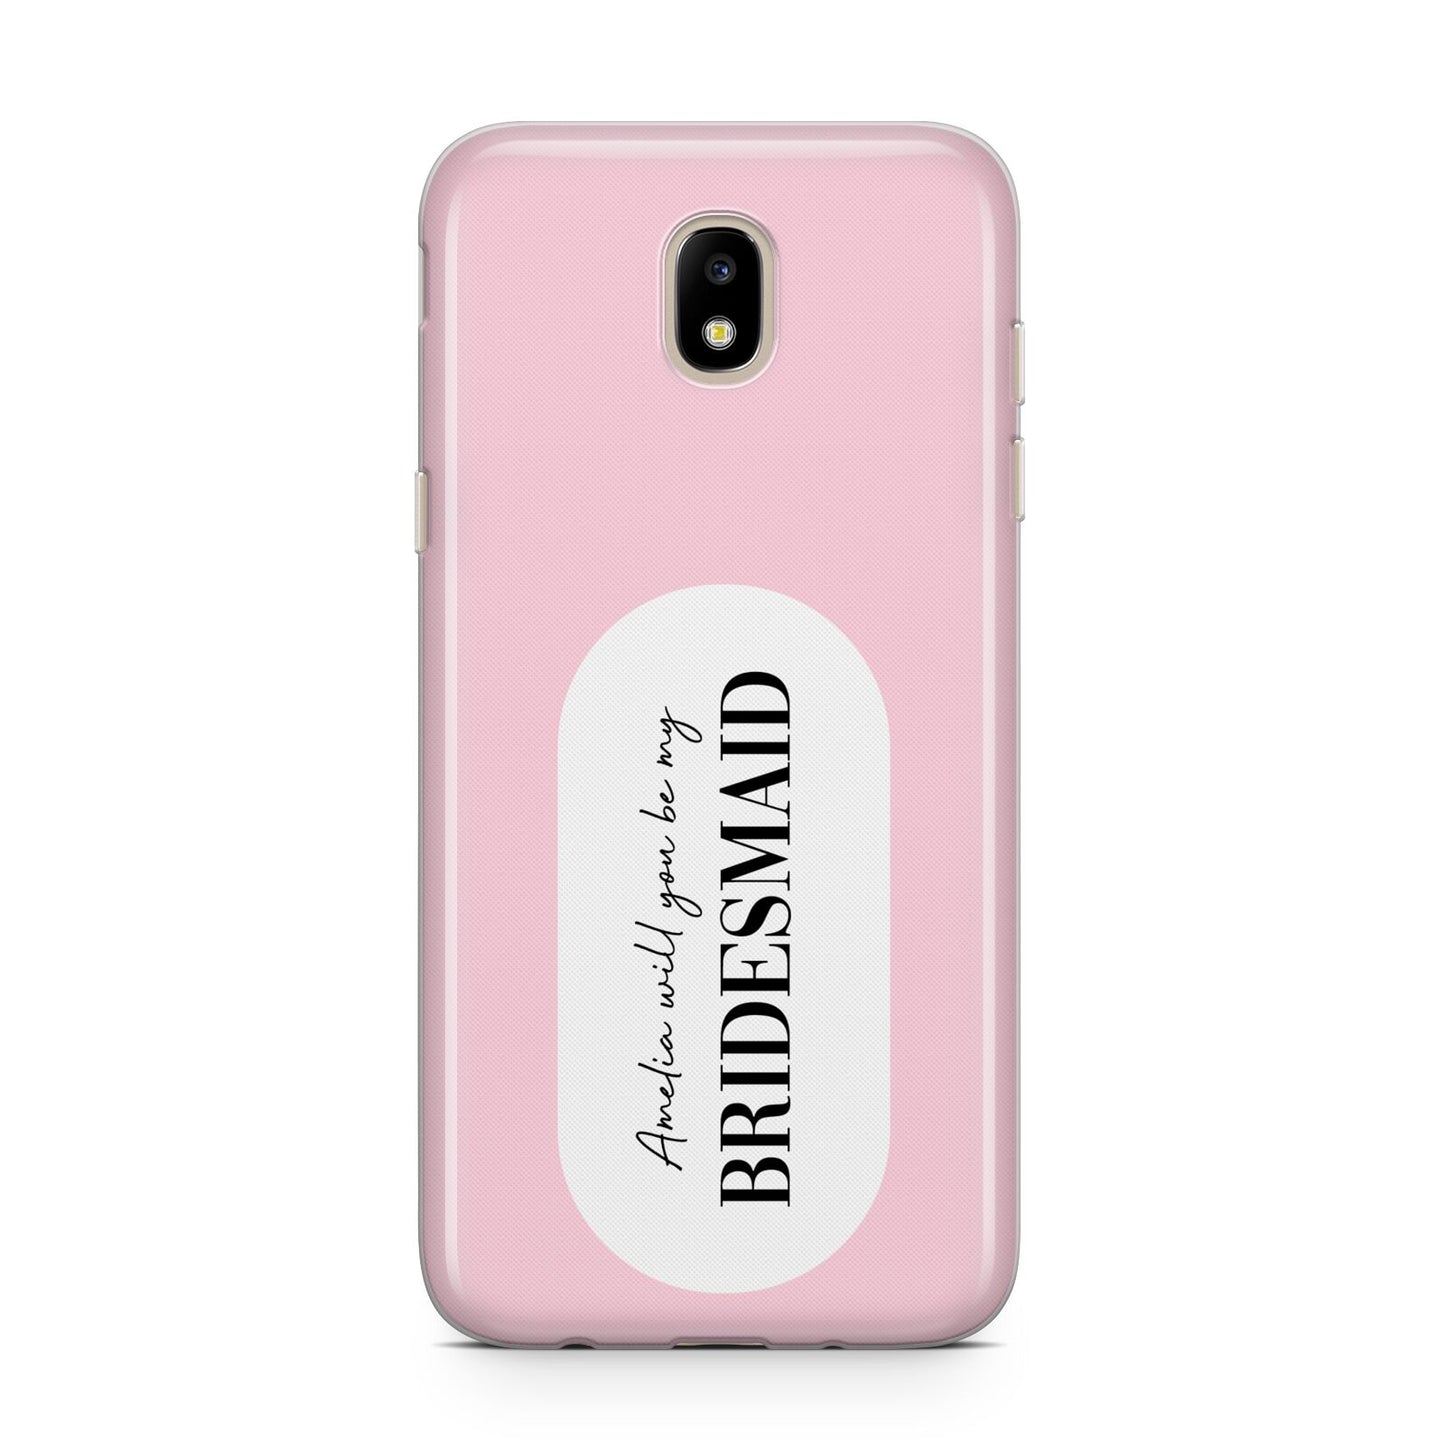 Will You Be My Bridesmaid Samsung J5 2017 Case